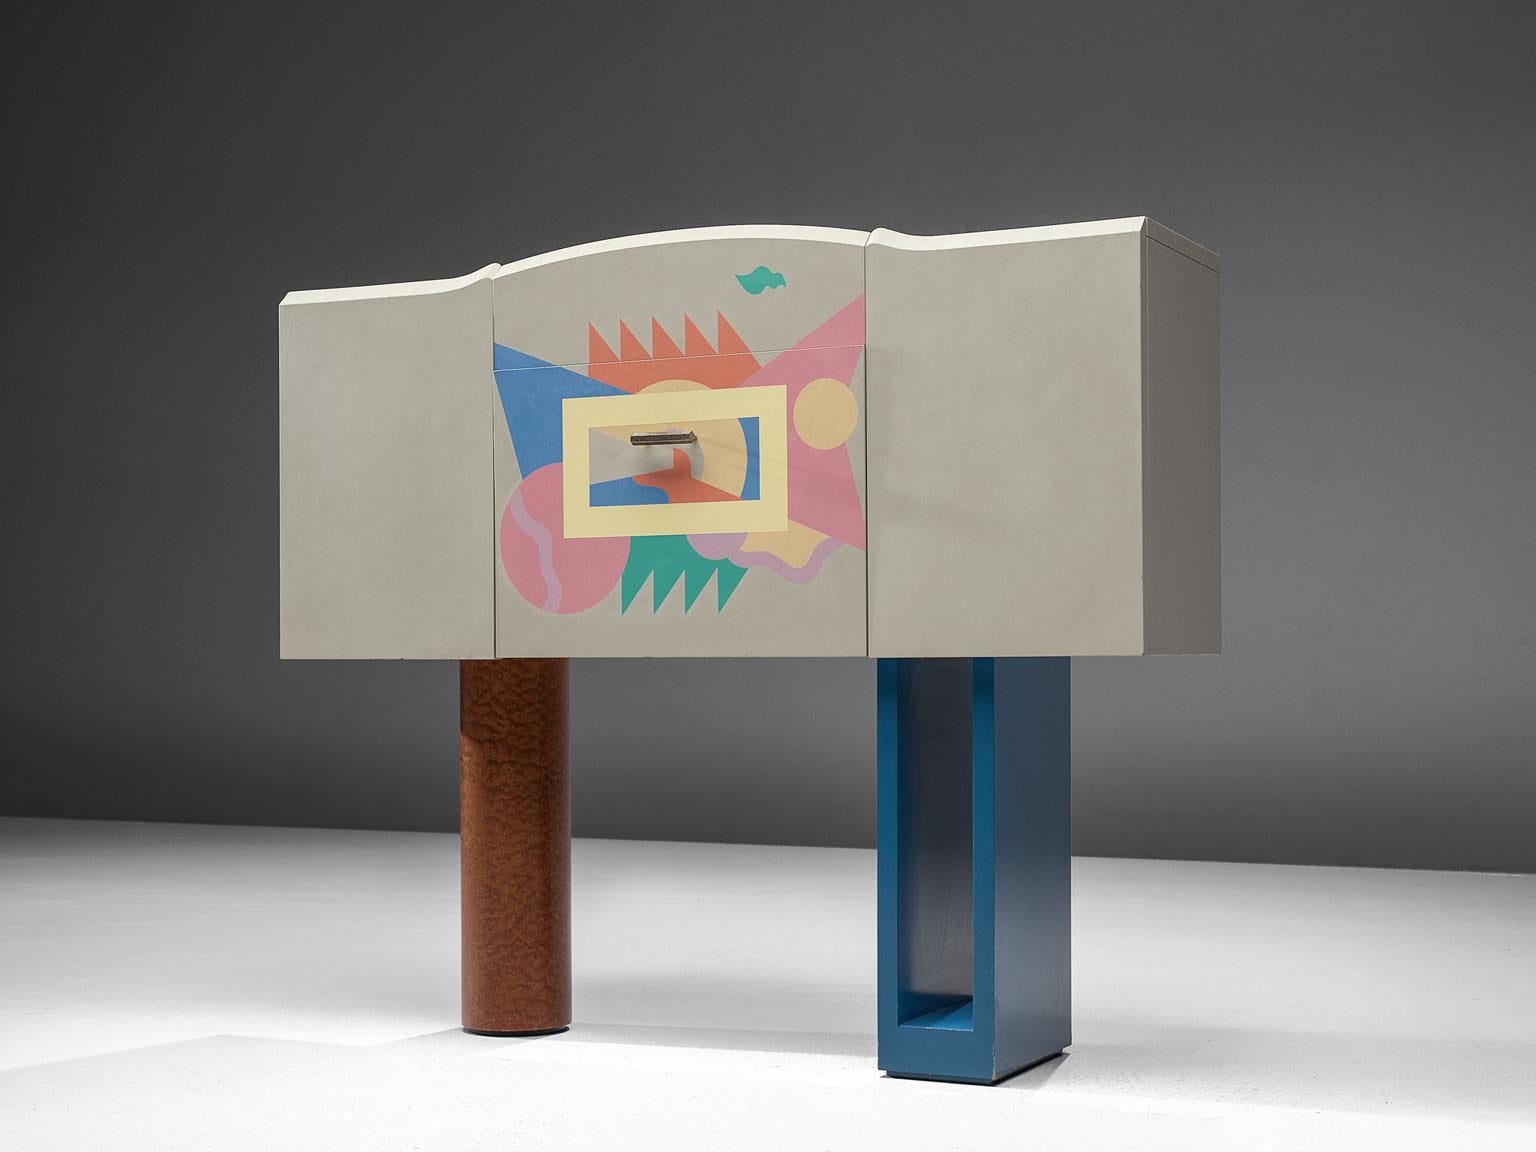 Alessandro Mendini, cabinet/bar, plywood and plastic, Italy, 1985.

This distinct and polychrome cabinet is exemplary for the postmodern interior design of the 1980s. This bar is designed by Alessandro Mendini (1931-) is an Italian artist and